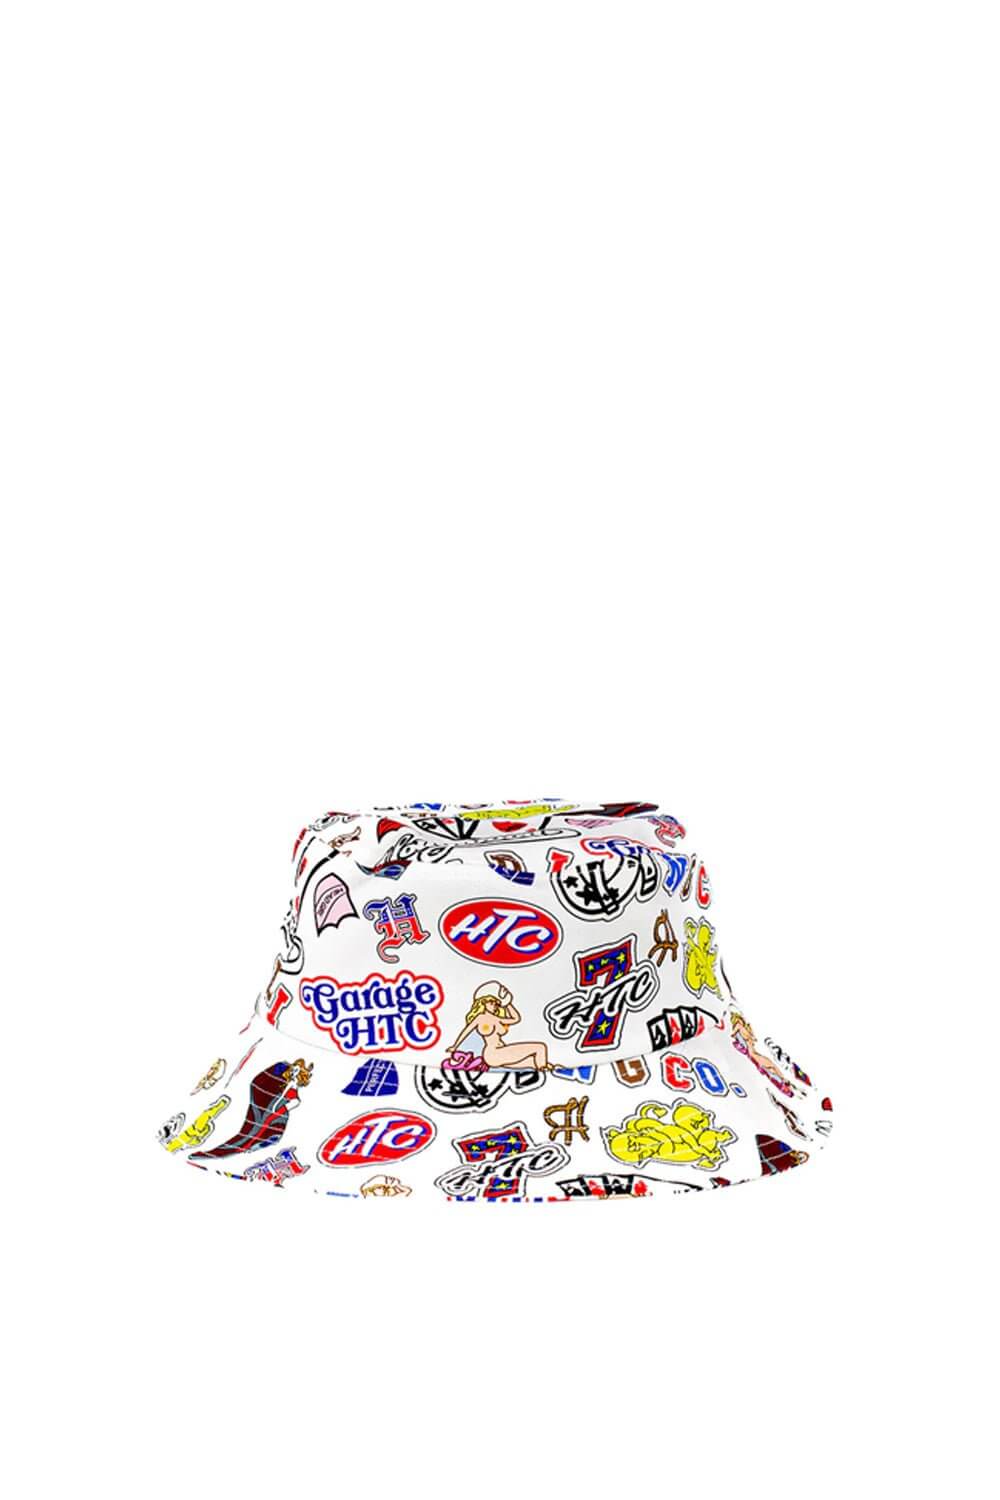 HTC GARAGE BUCKET White overall printed bucket. One size fits all. 100% cotton. HTC LOS ANGELES